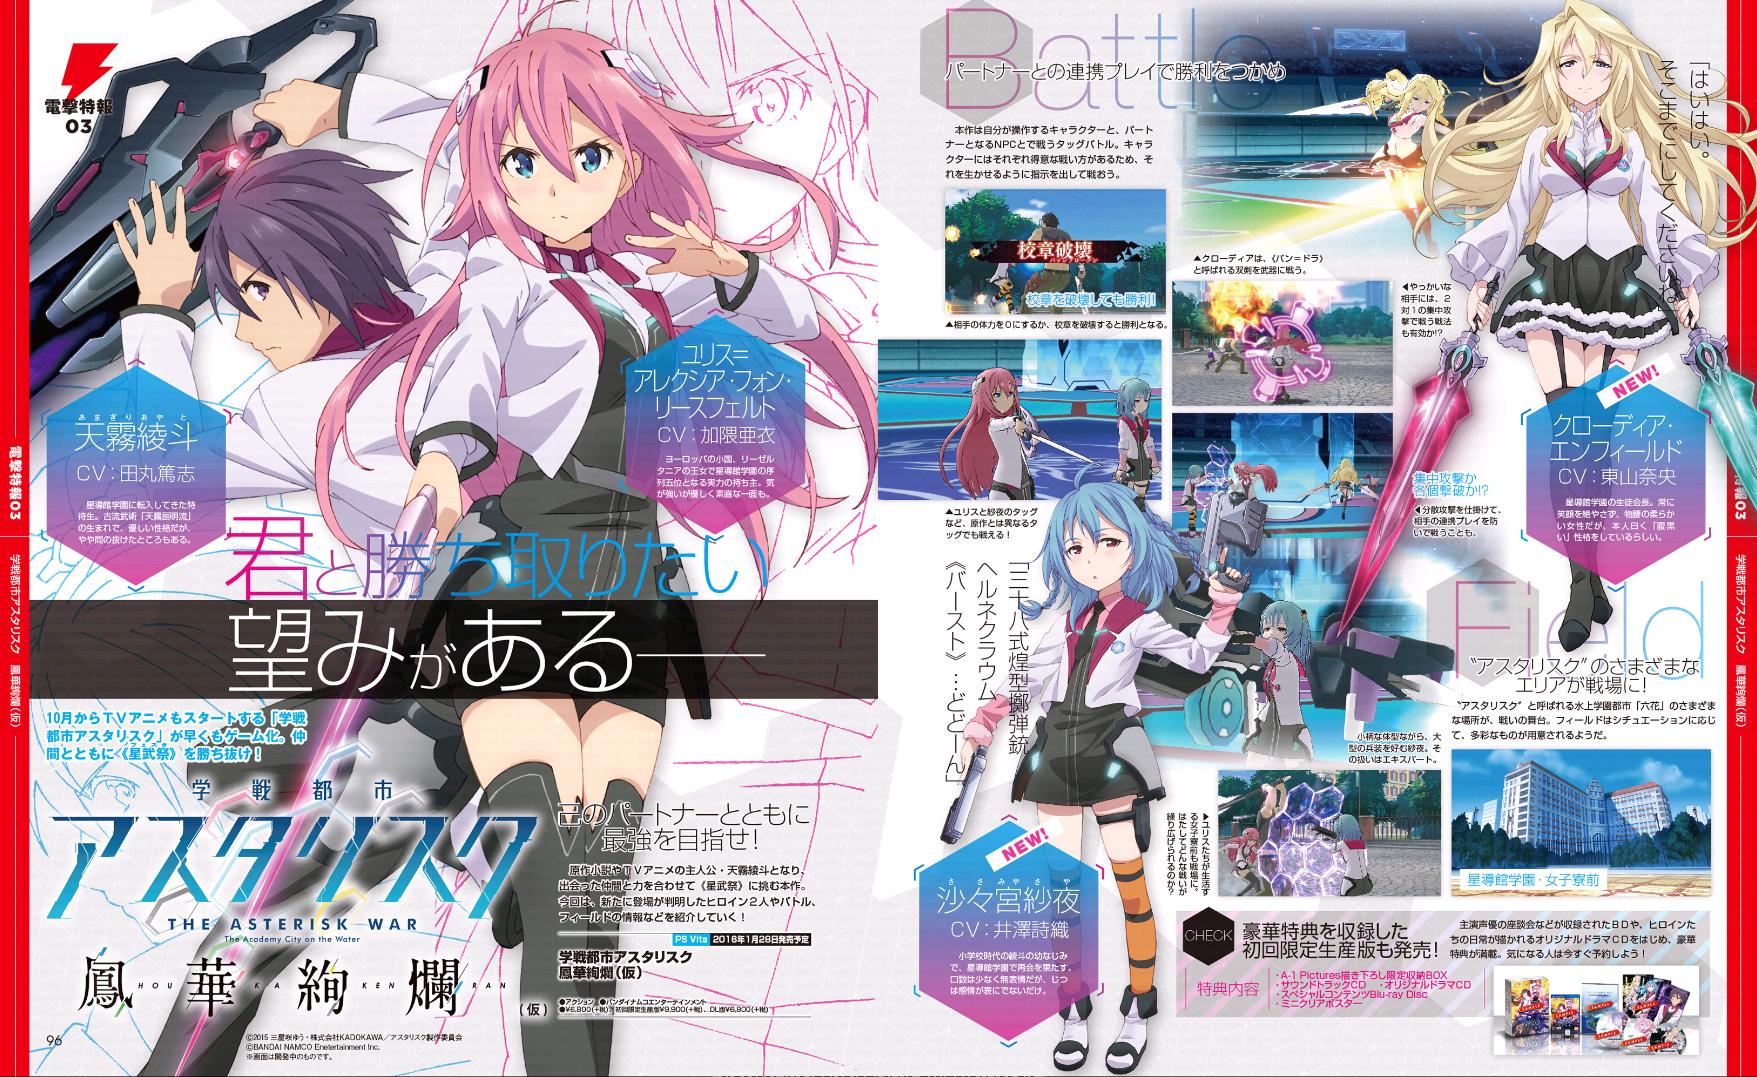 The Asterisk War: The Academy City On The Water #1